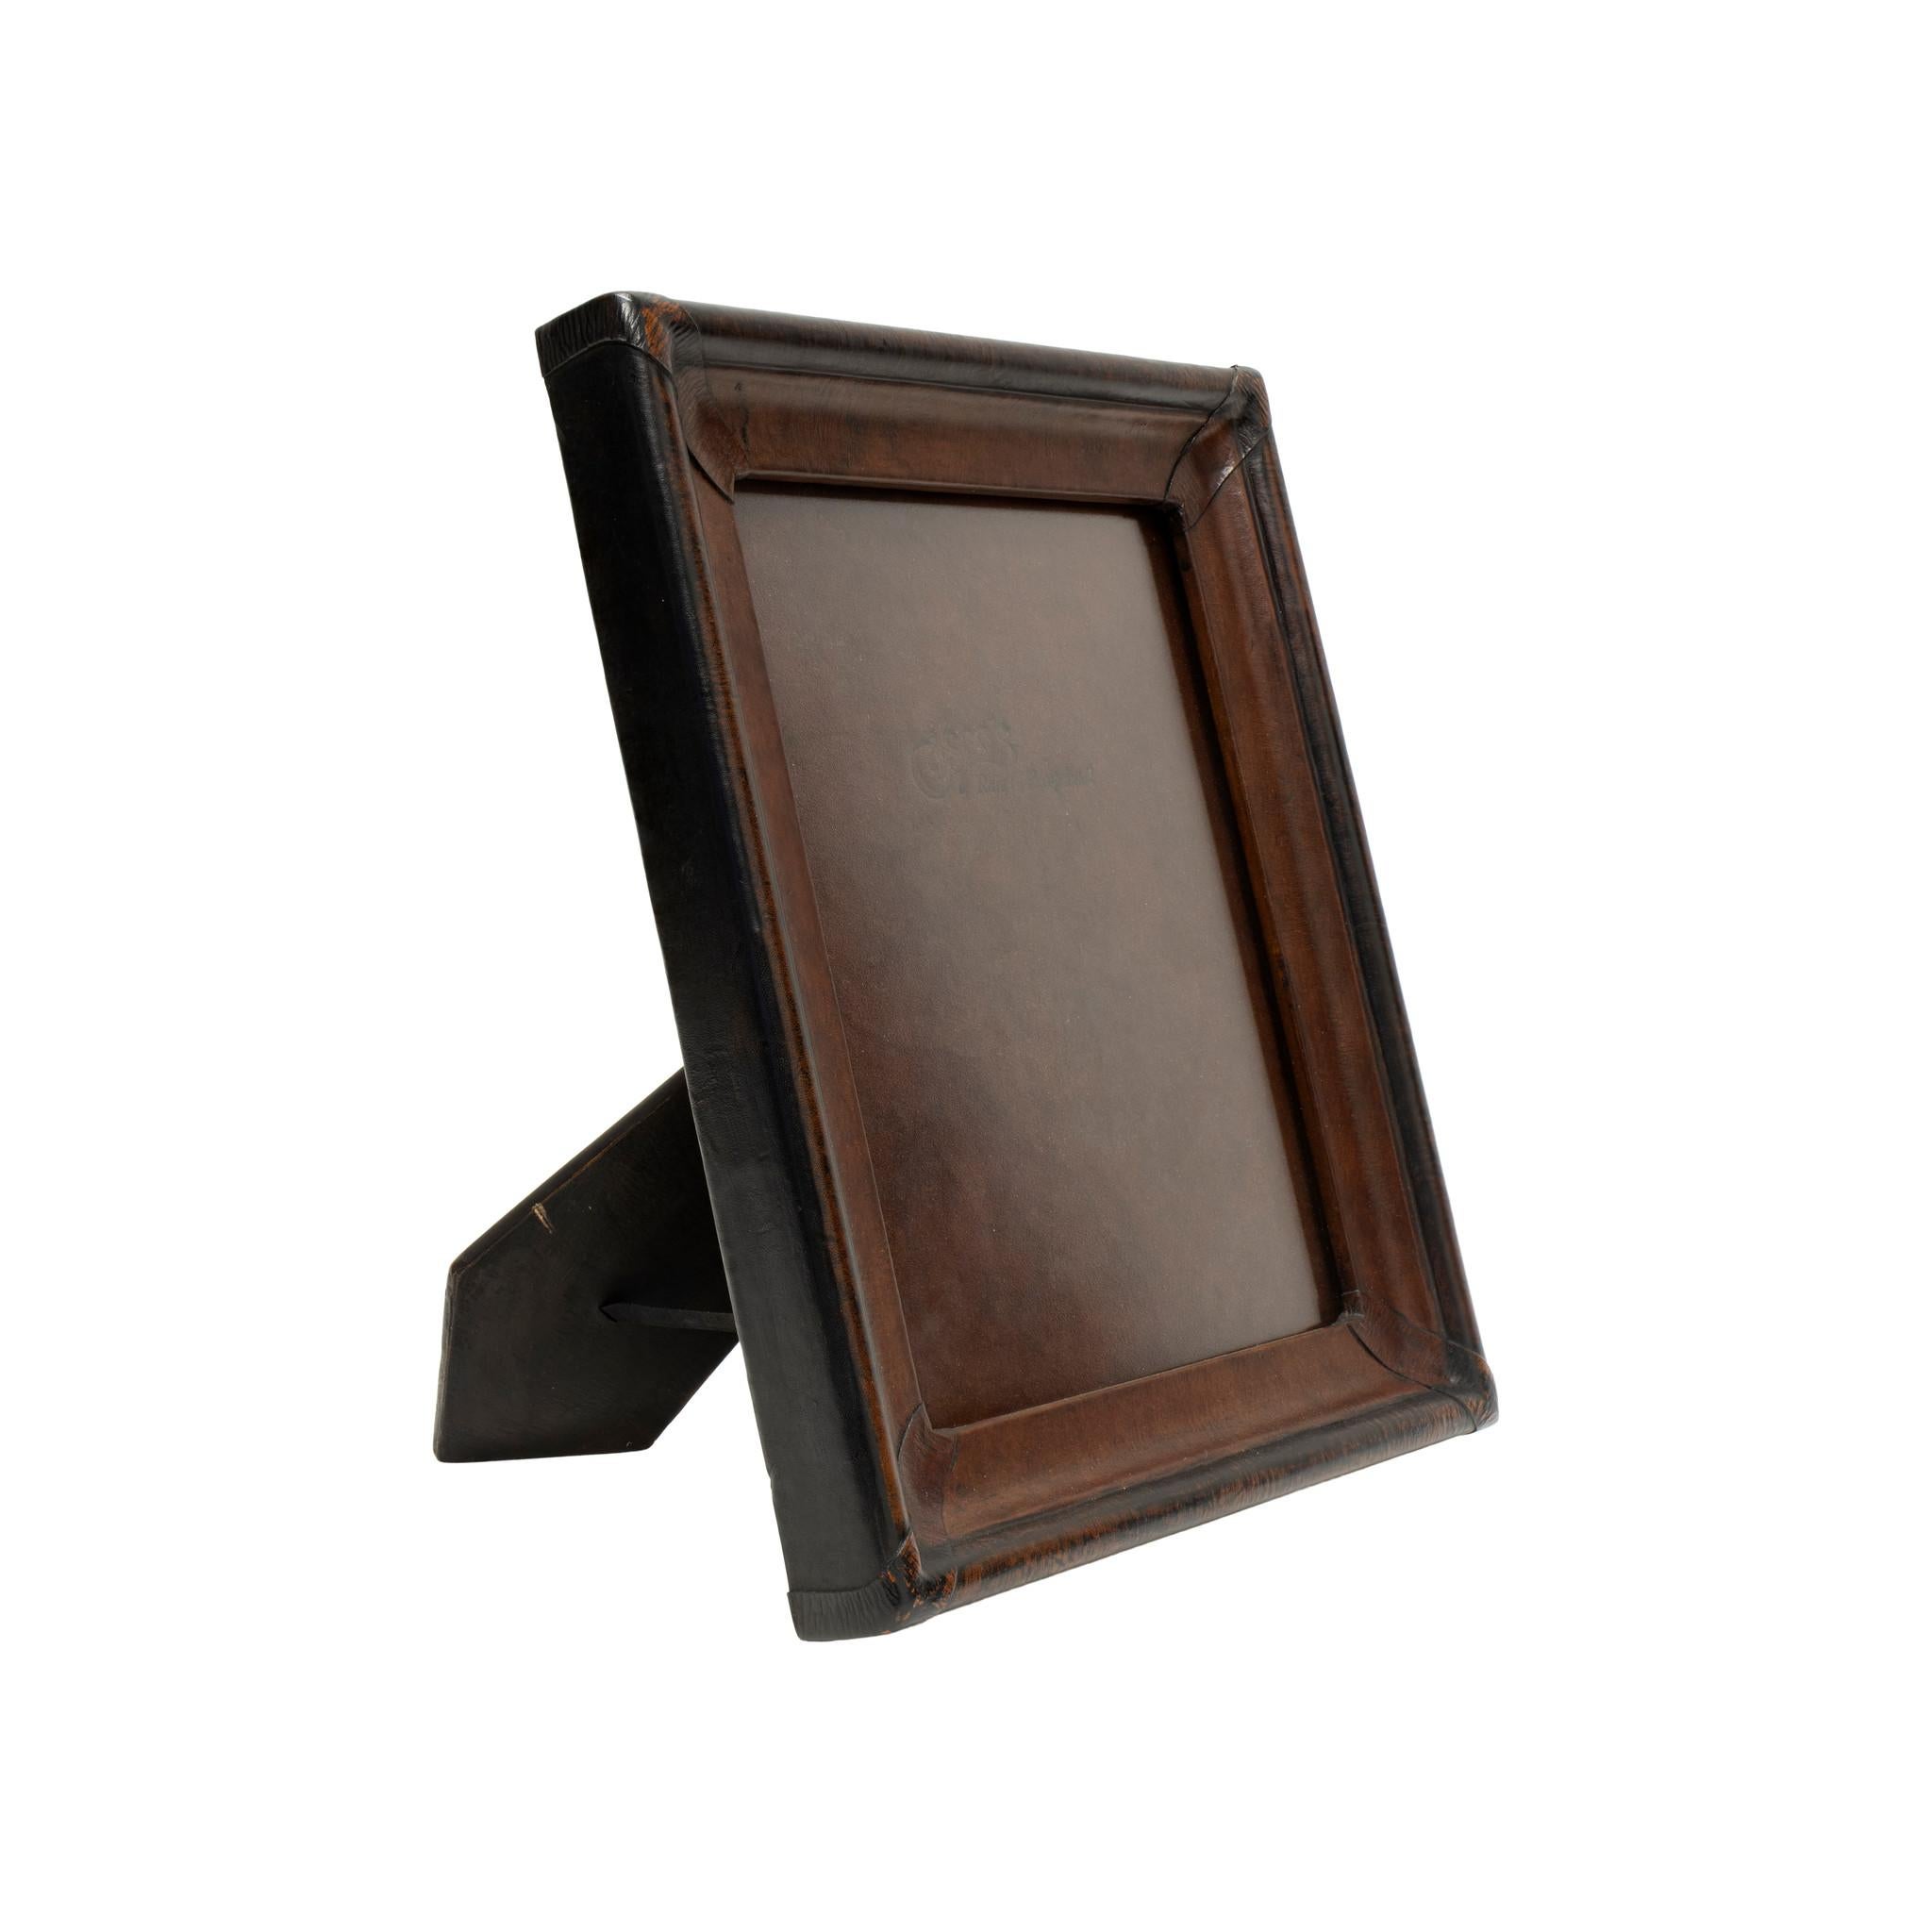 8x10 Dark Brown & Black Leather Tabletop Picture Frame - The Dressage In New Condition For Sale In Coeur d'Alene, ID